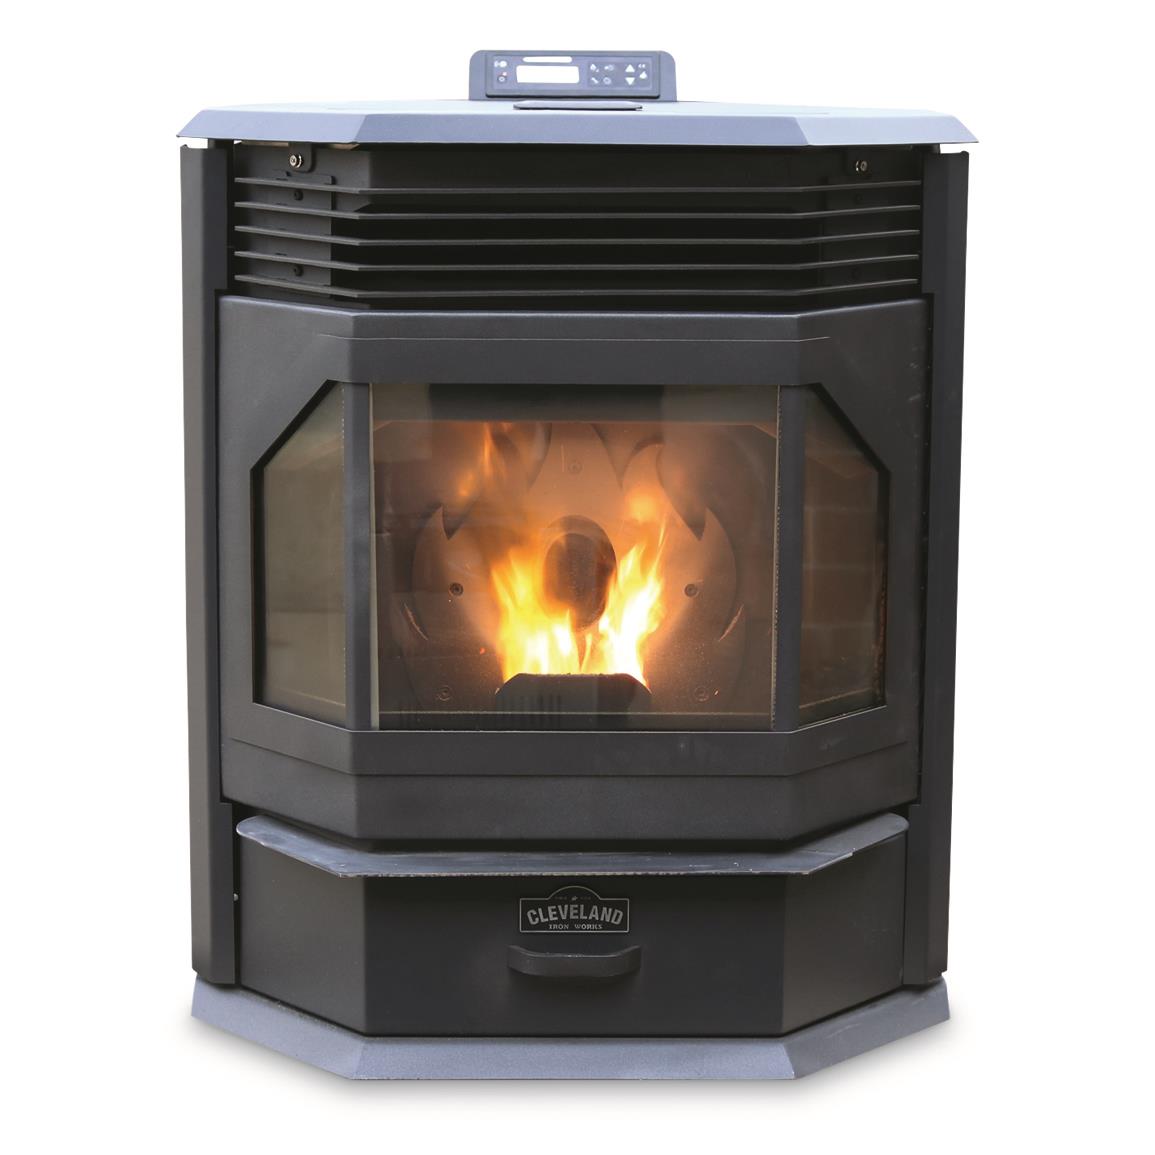 Cleveland Iron Works No. 210 Bay Front Pellet Stove